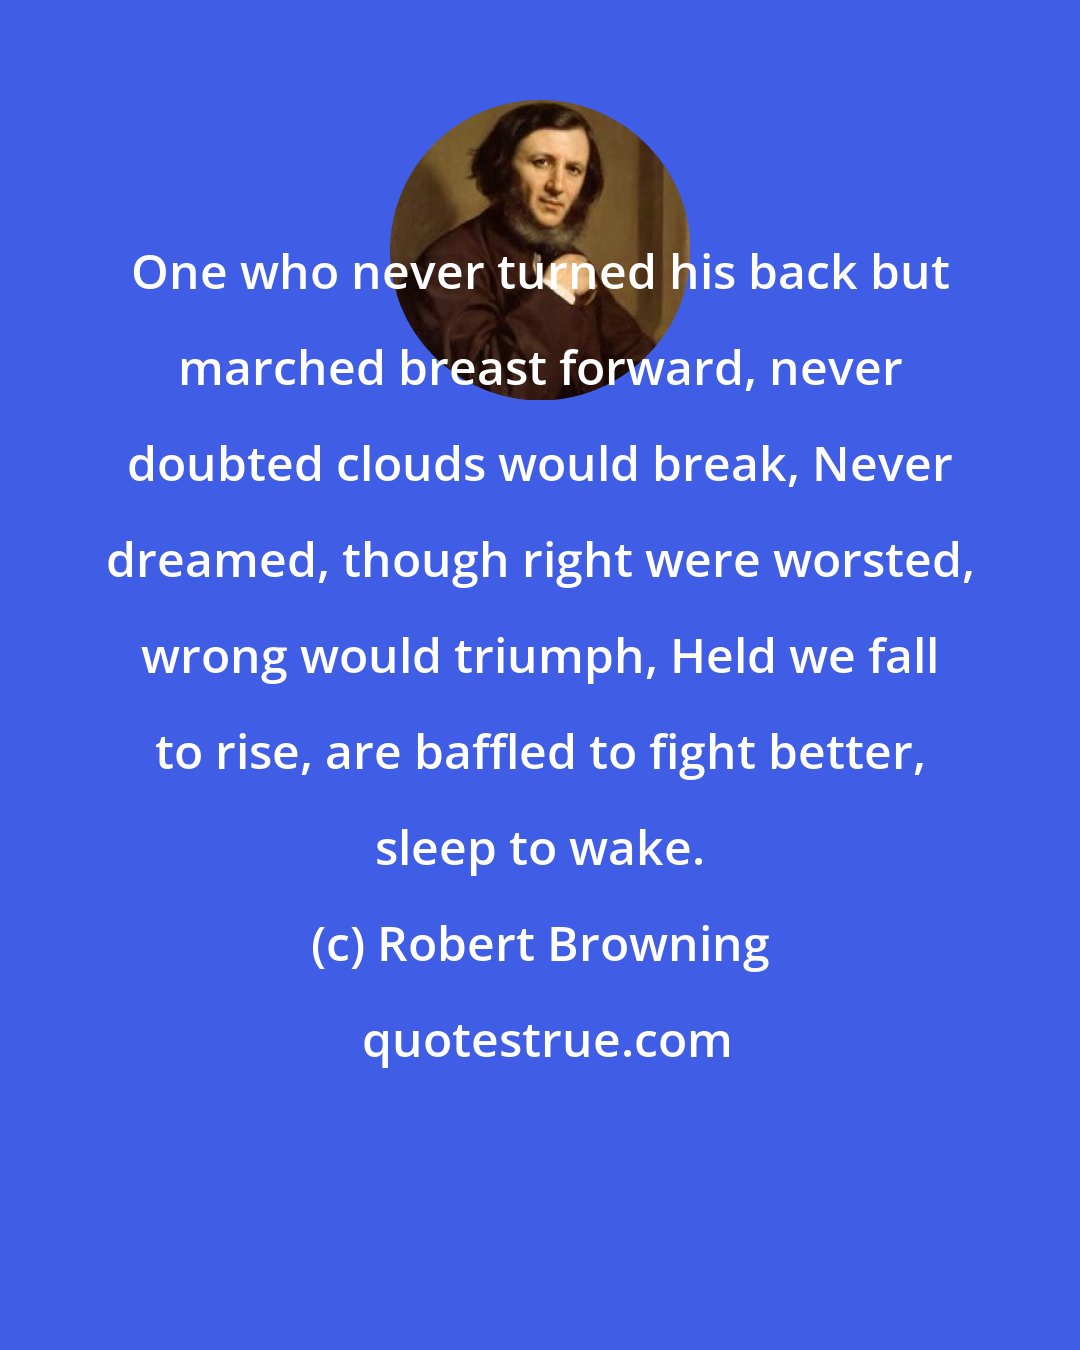 Robert Browning: One who never turned his back but marched breast forward, never doubted clouds would break, Never dreamed, though right were worsted, wrong would triumph, Held we fall to rise, are baffled to fight better, sleep to wake.